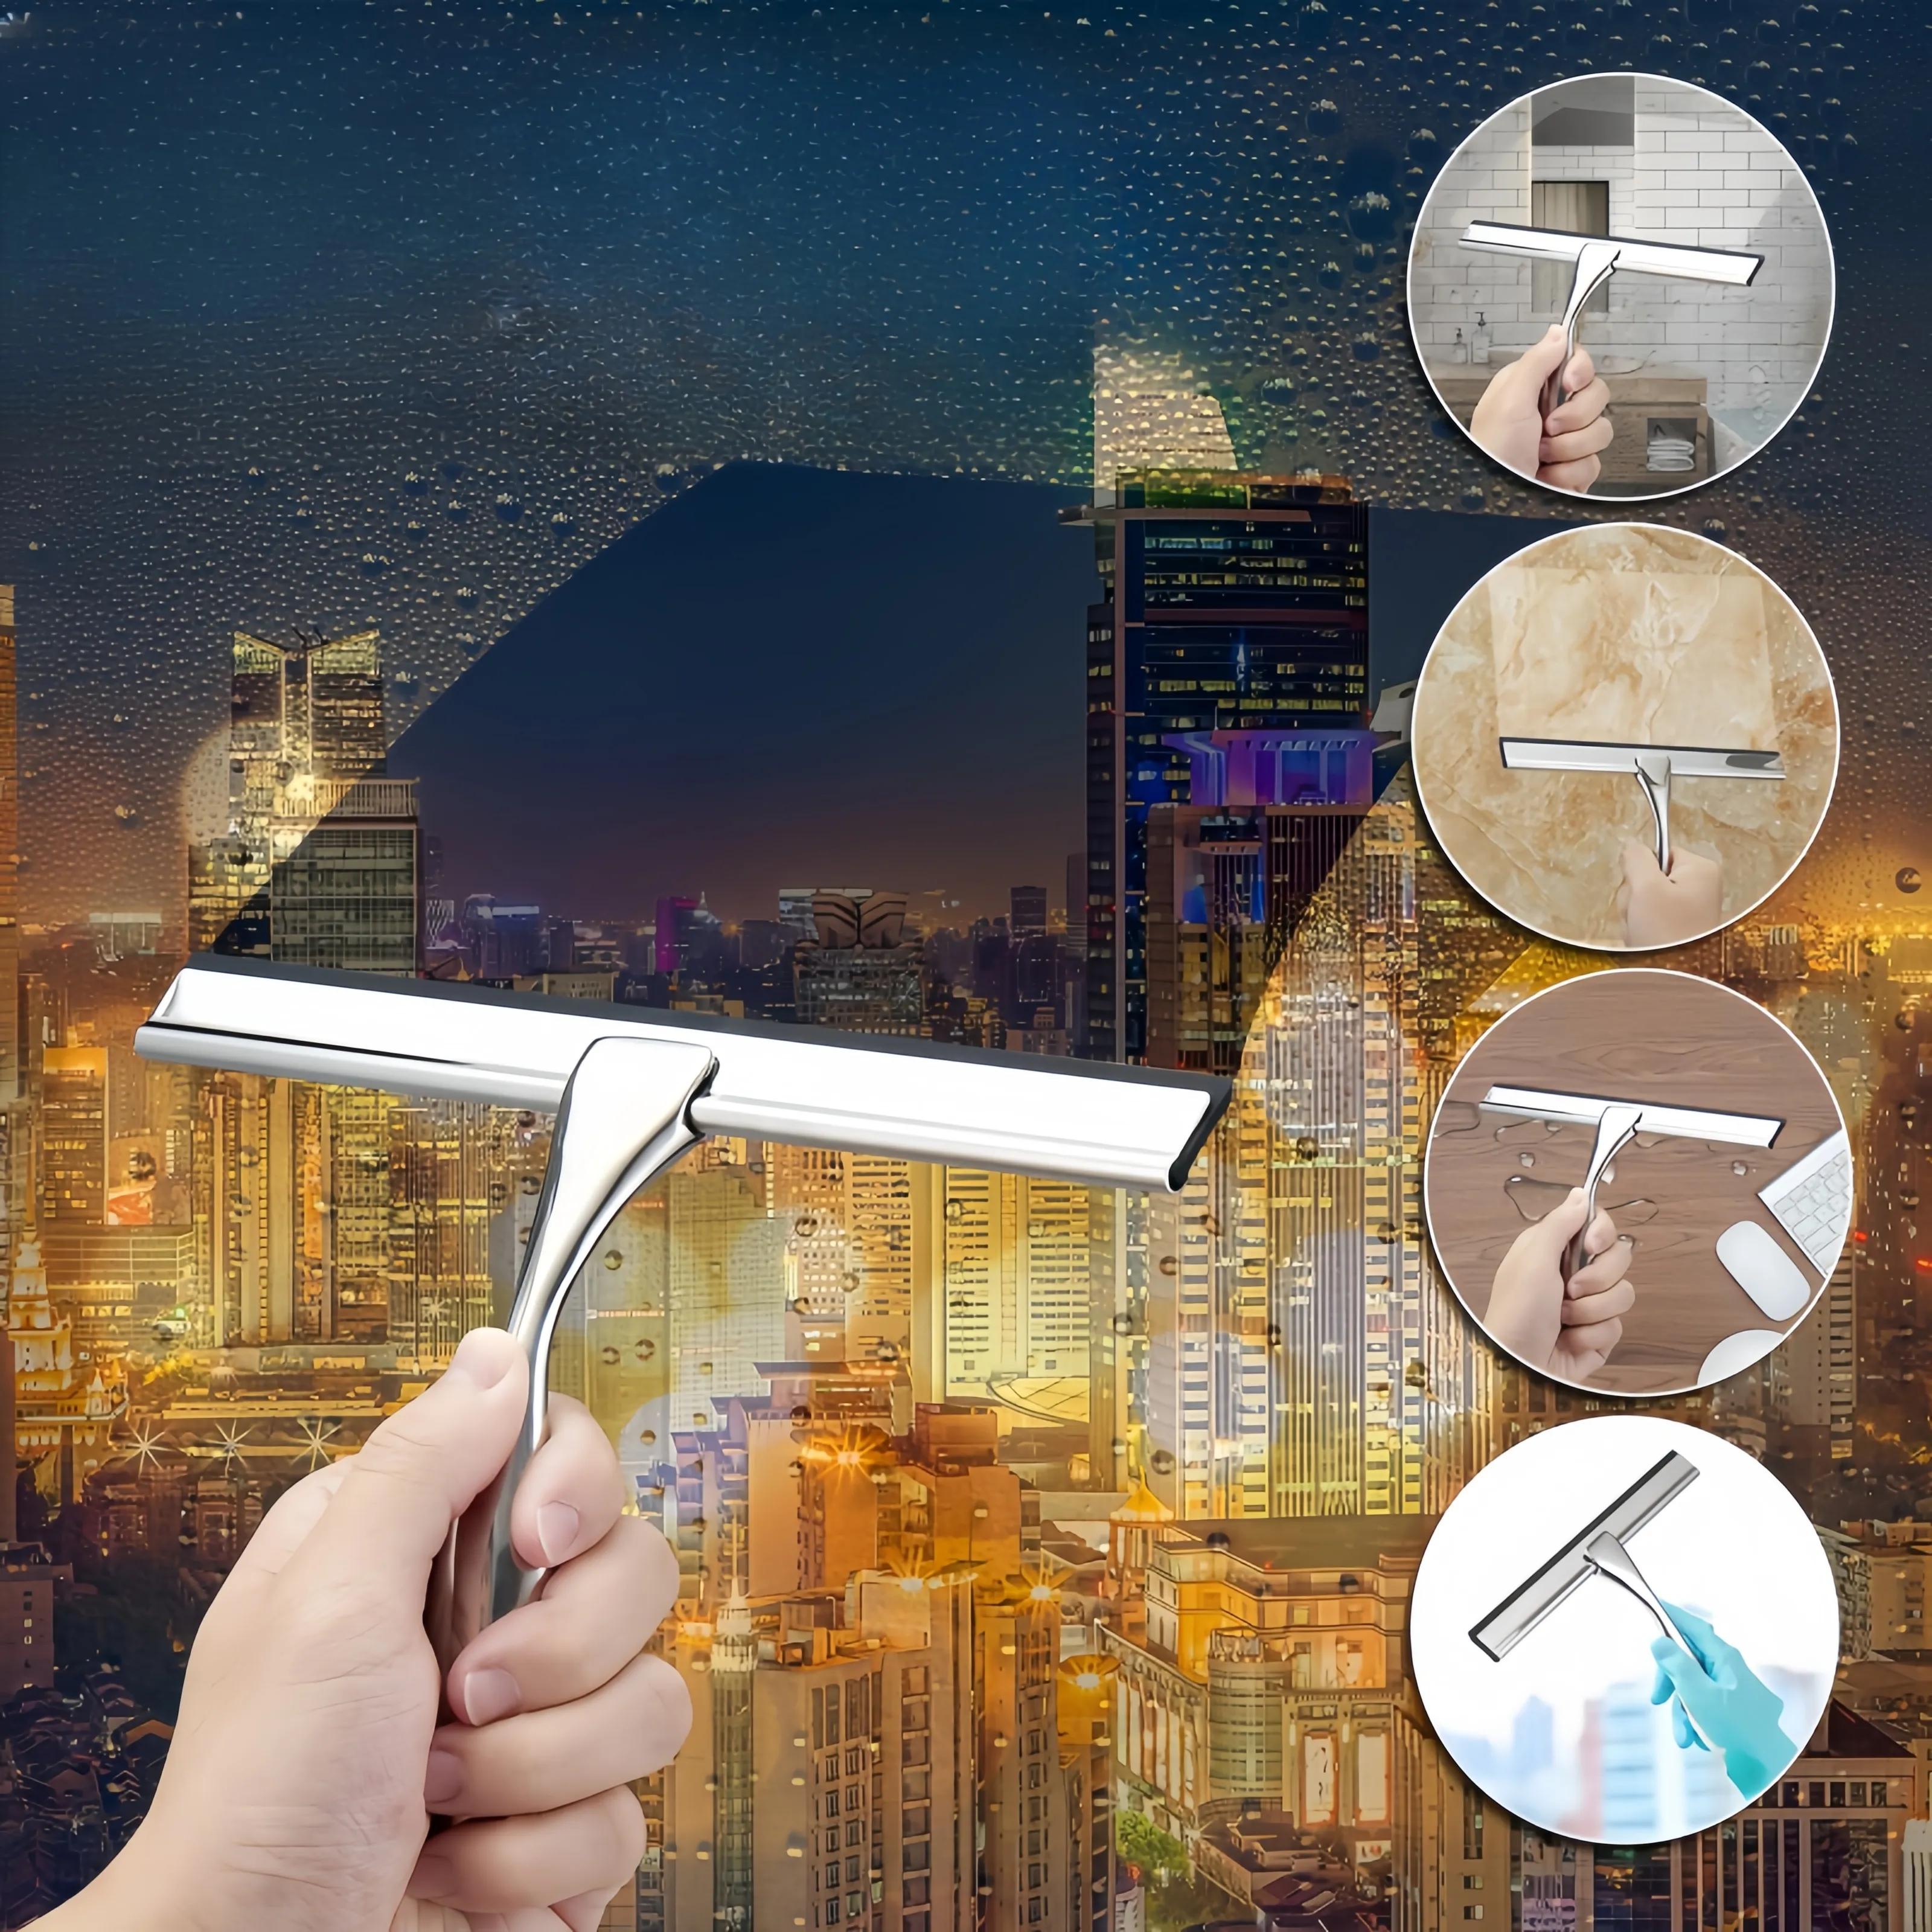 Hot Sale Stainless Steel Window Washer Squeegees Robust Household Cleaning Tools&Accessories Squeegee